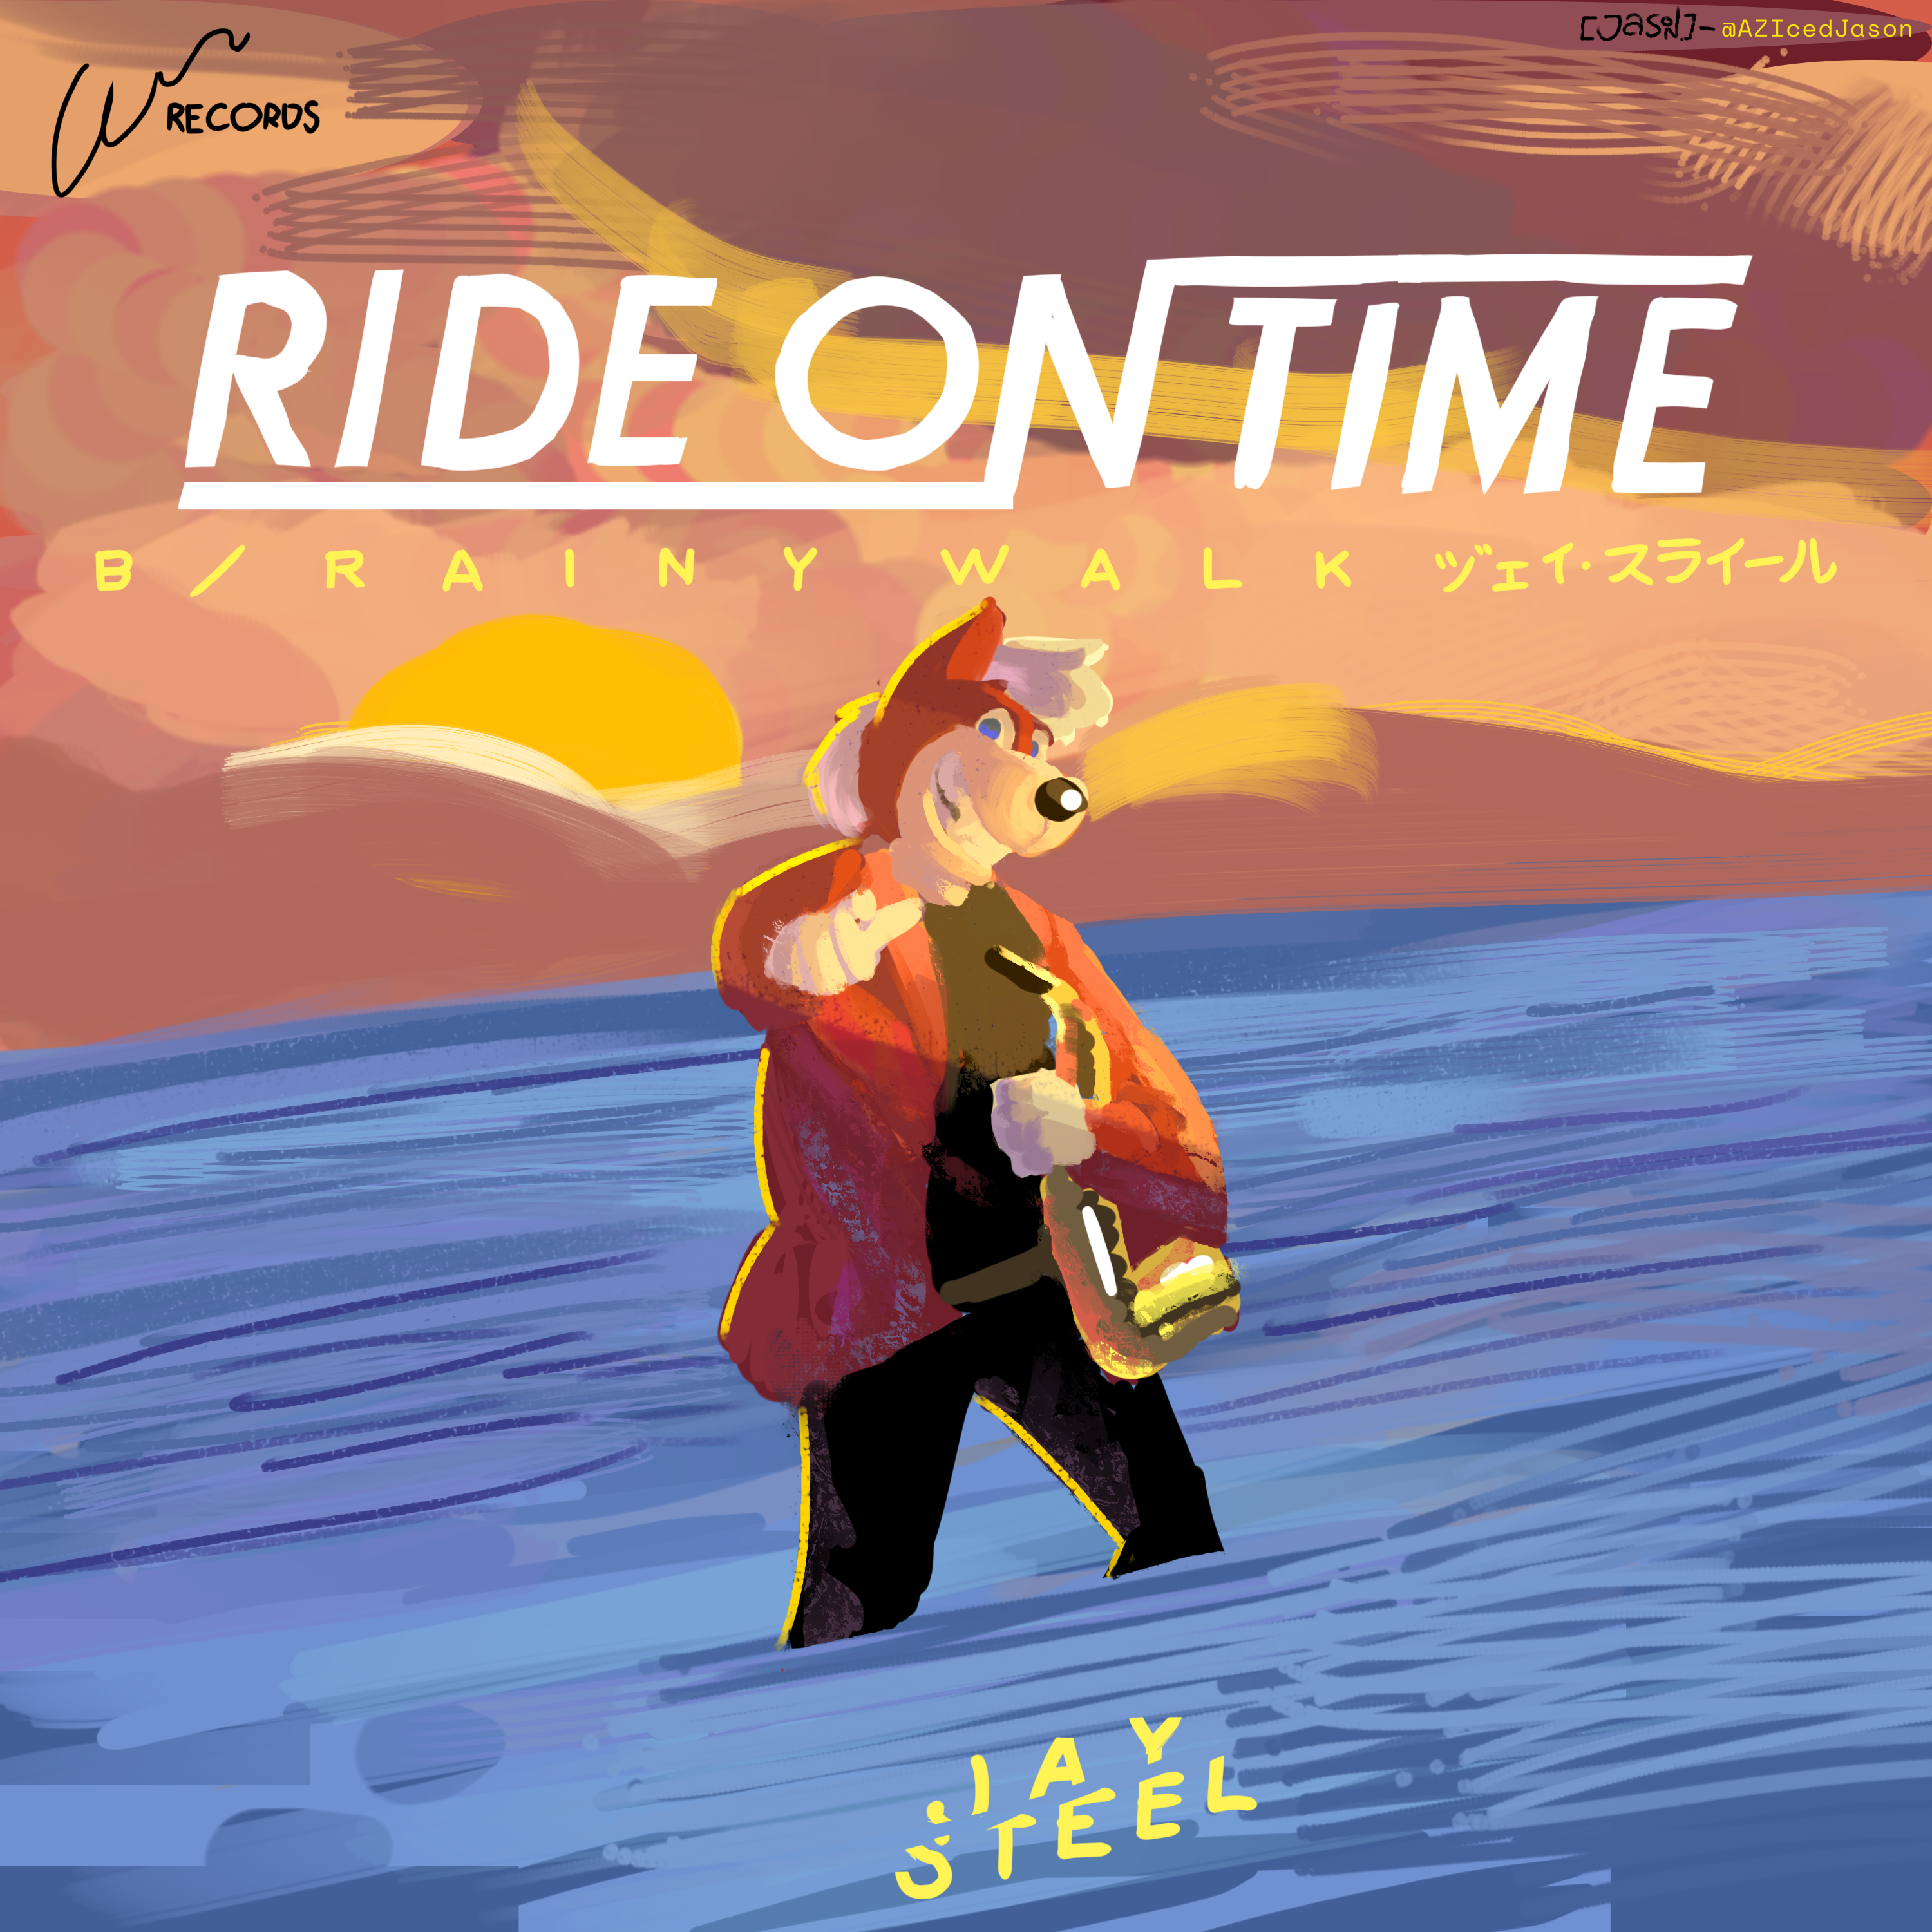 Wonderful artwork by @AZIcedJason of my fursona, Jay Steel, inserted into the ride on time single cover.